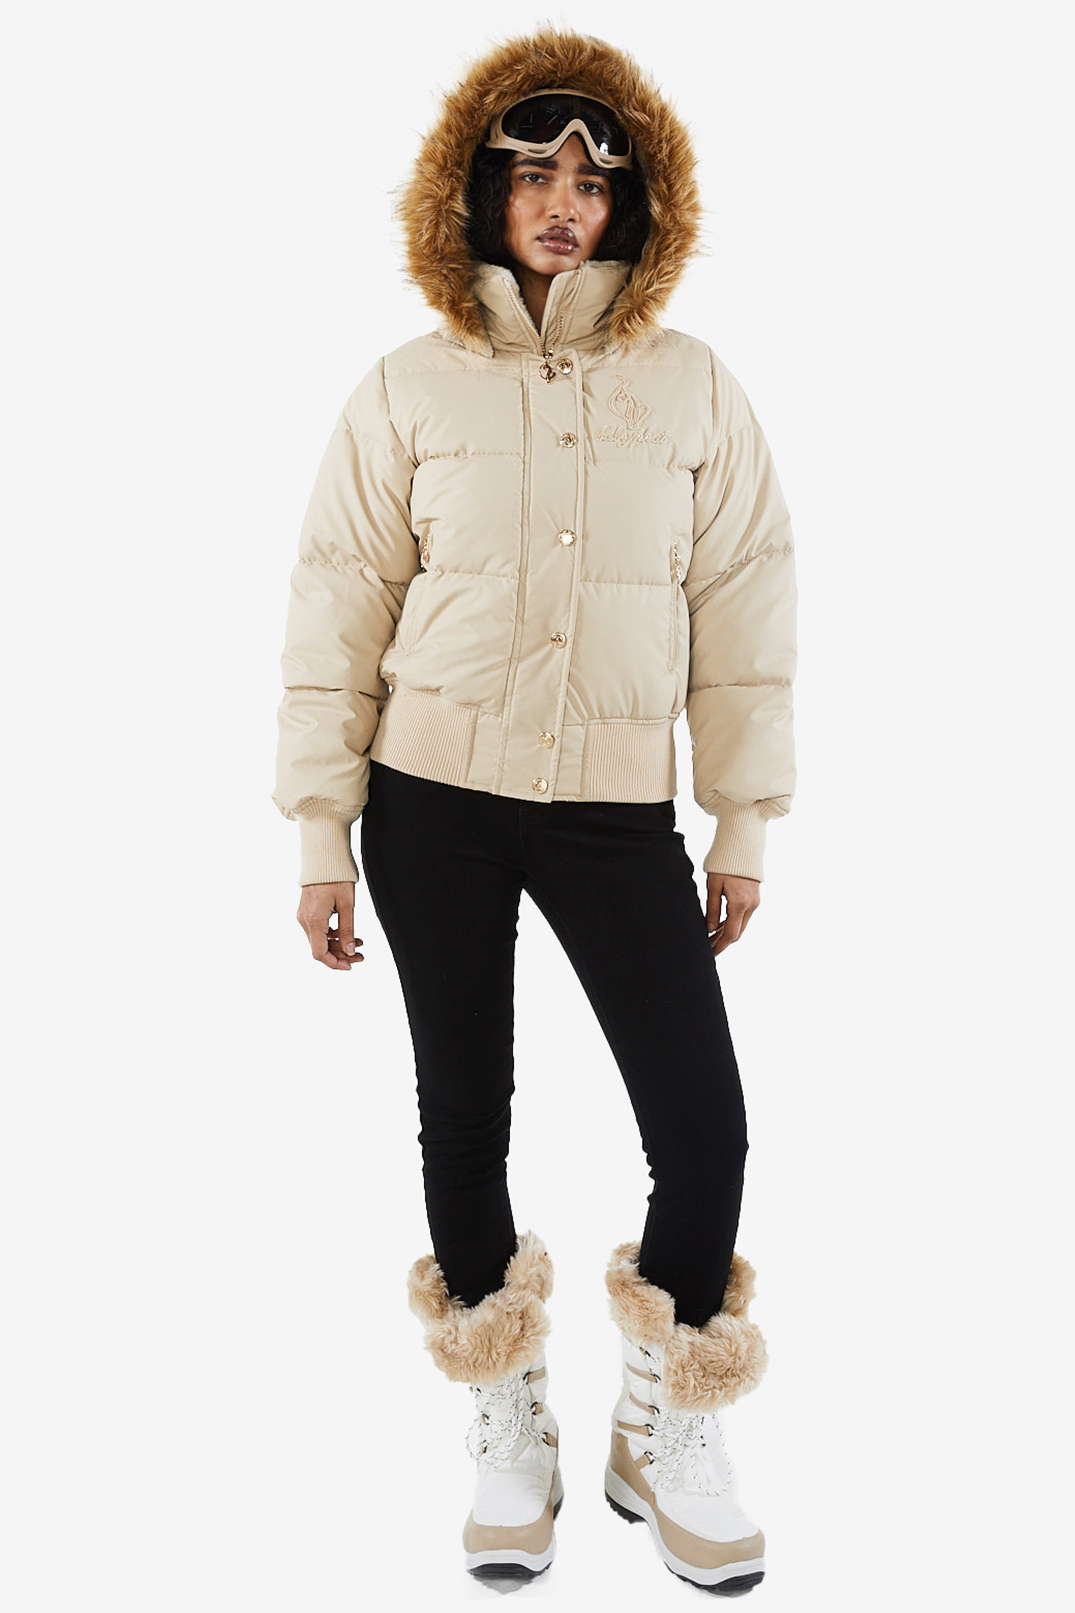 Baby Phat reissue OG puffer jacket in sand is a tan beige jacket that features a faux fur trim hood, cat logo detailing on the front and back, gold buttons, and a cat zipper pull.